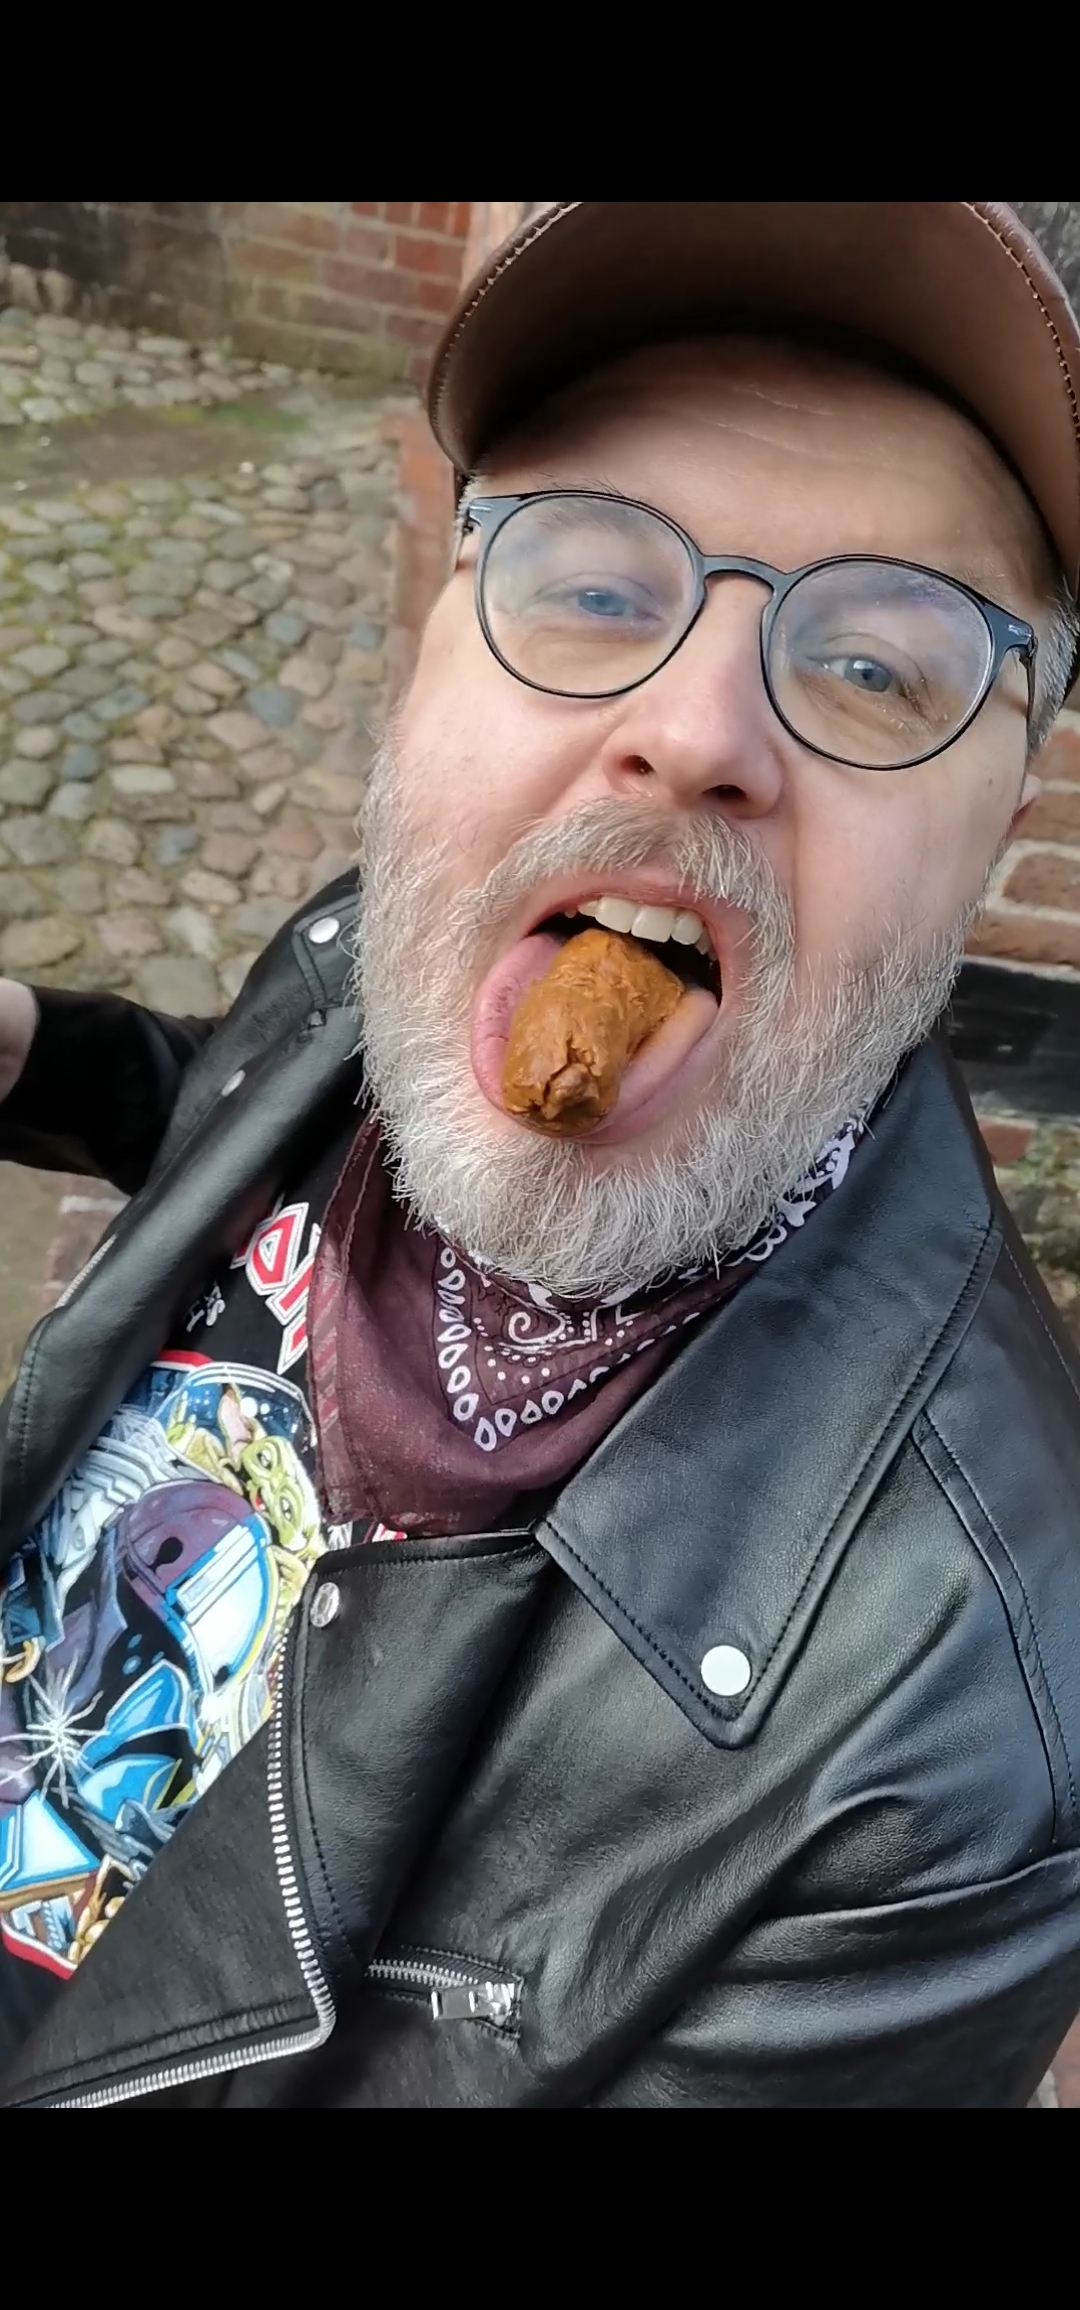 Public shit eating in full leather Pt. 2